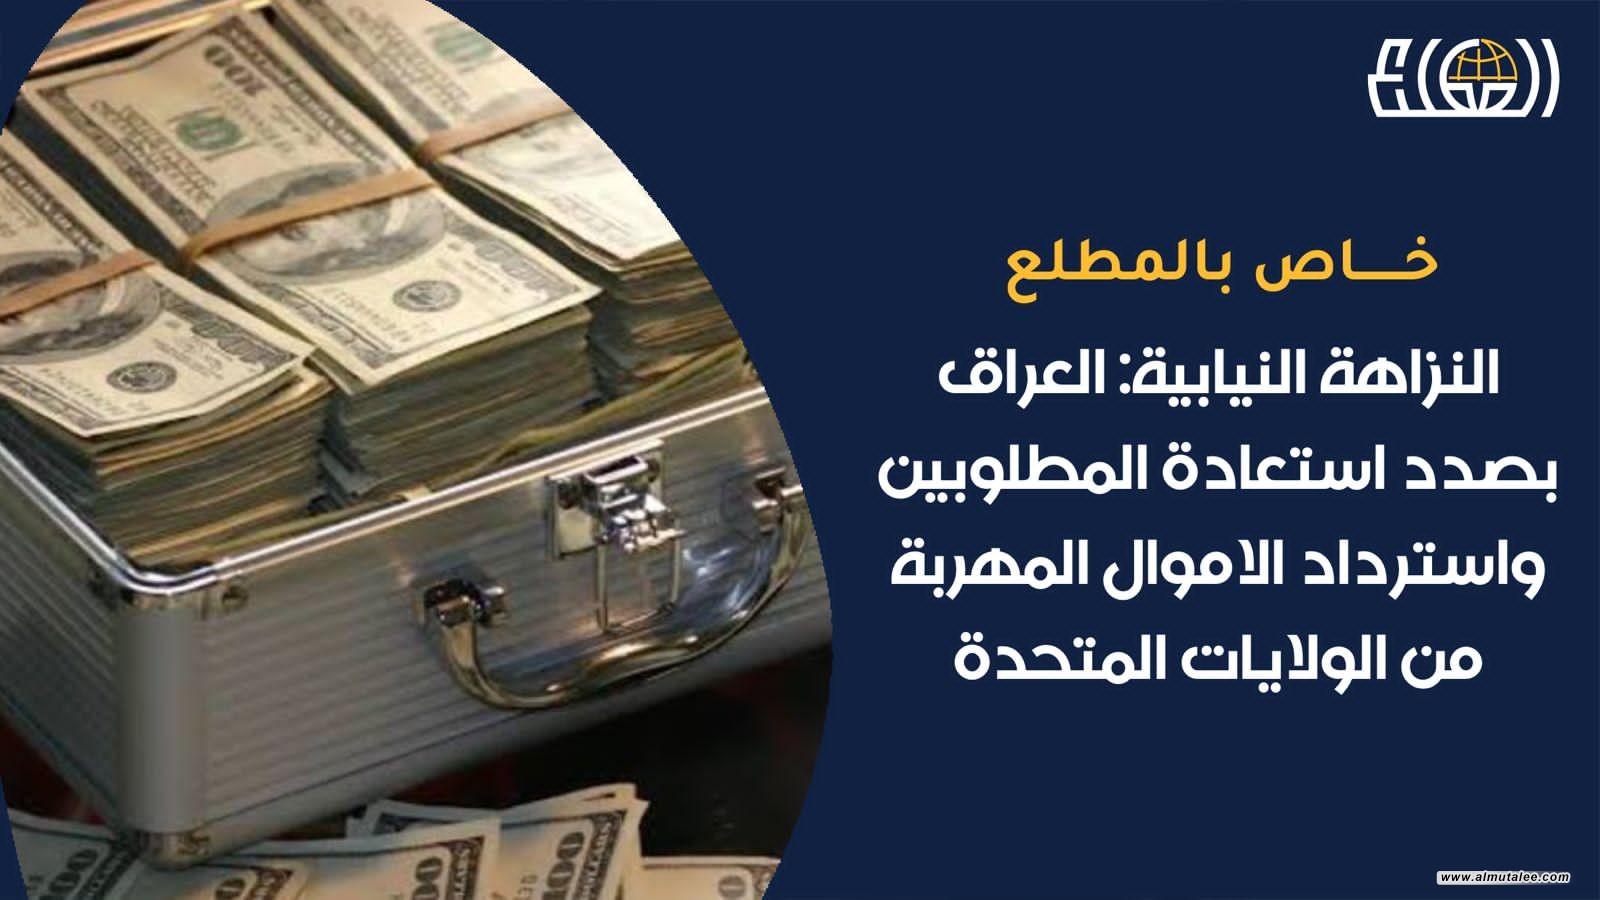 Parliamentary Integrity - Iraq is in the process of recovering wanted persons and recovering money smuggled from the United States